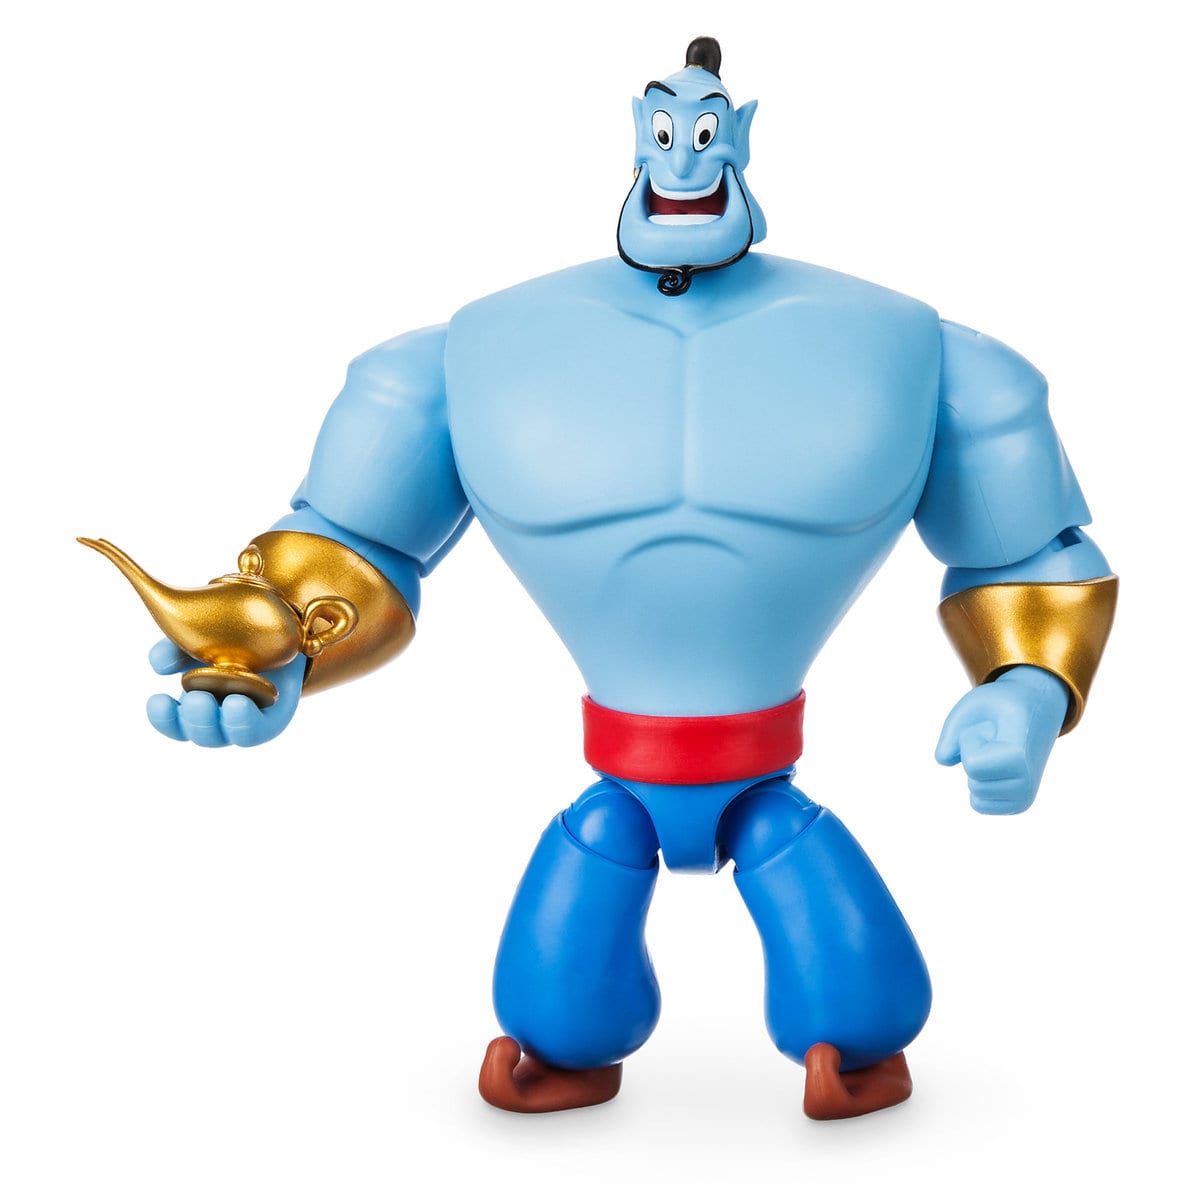 Aladdin’s Genie Toybox Action Figure Out Now